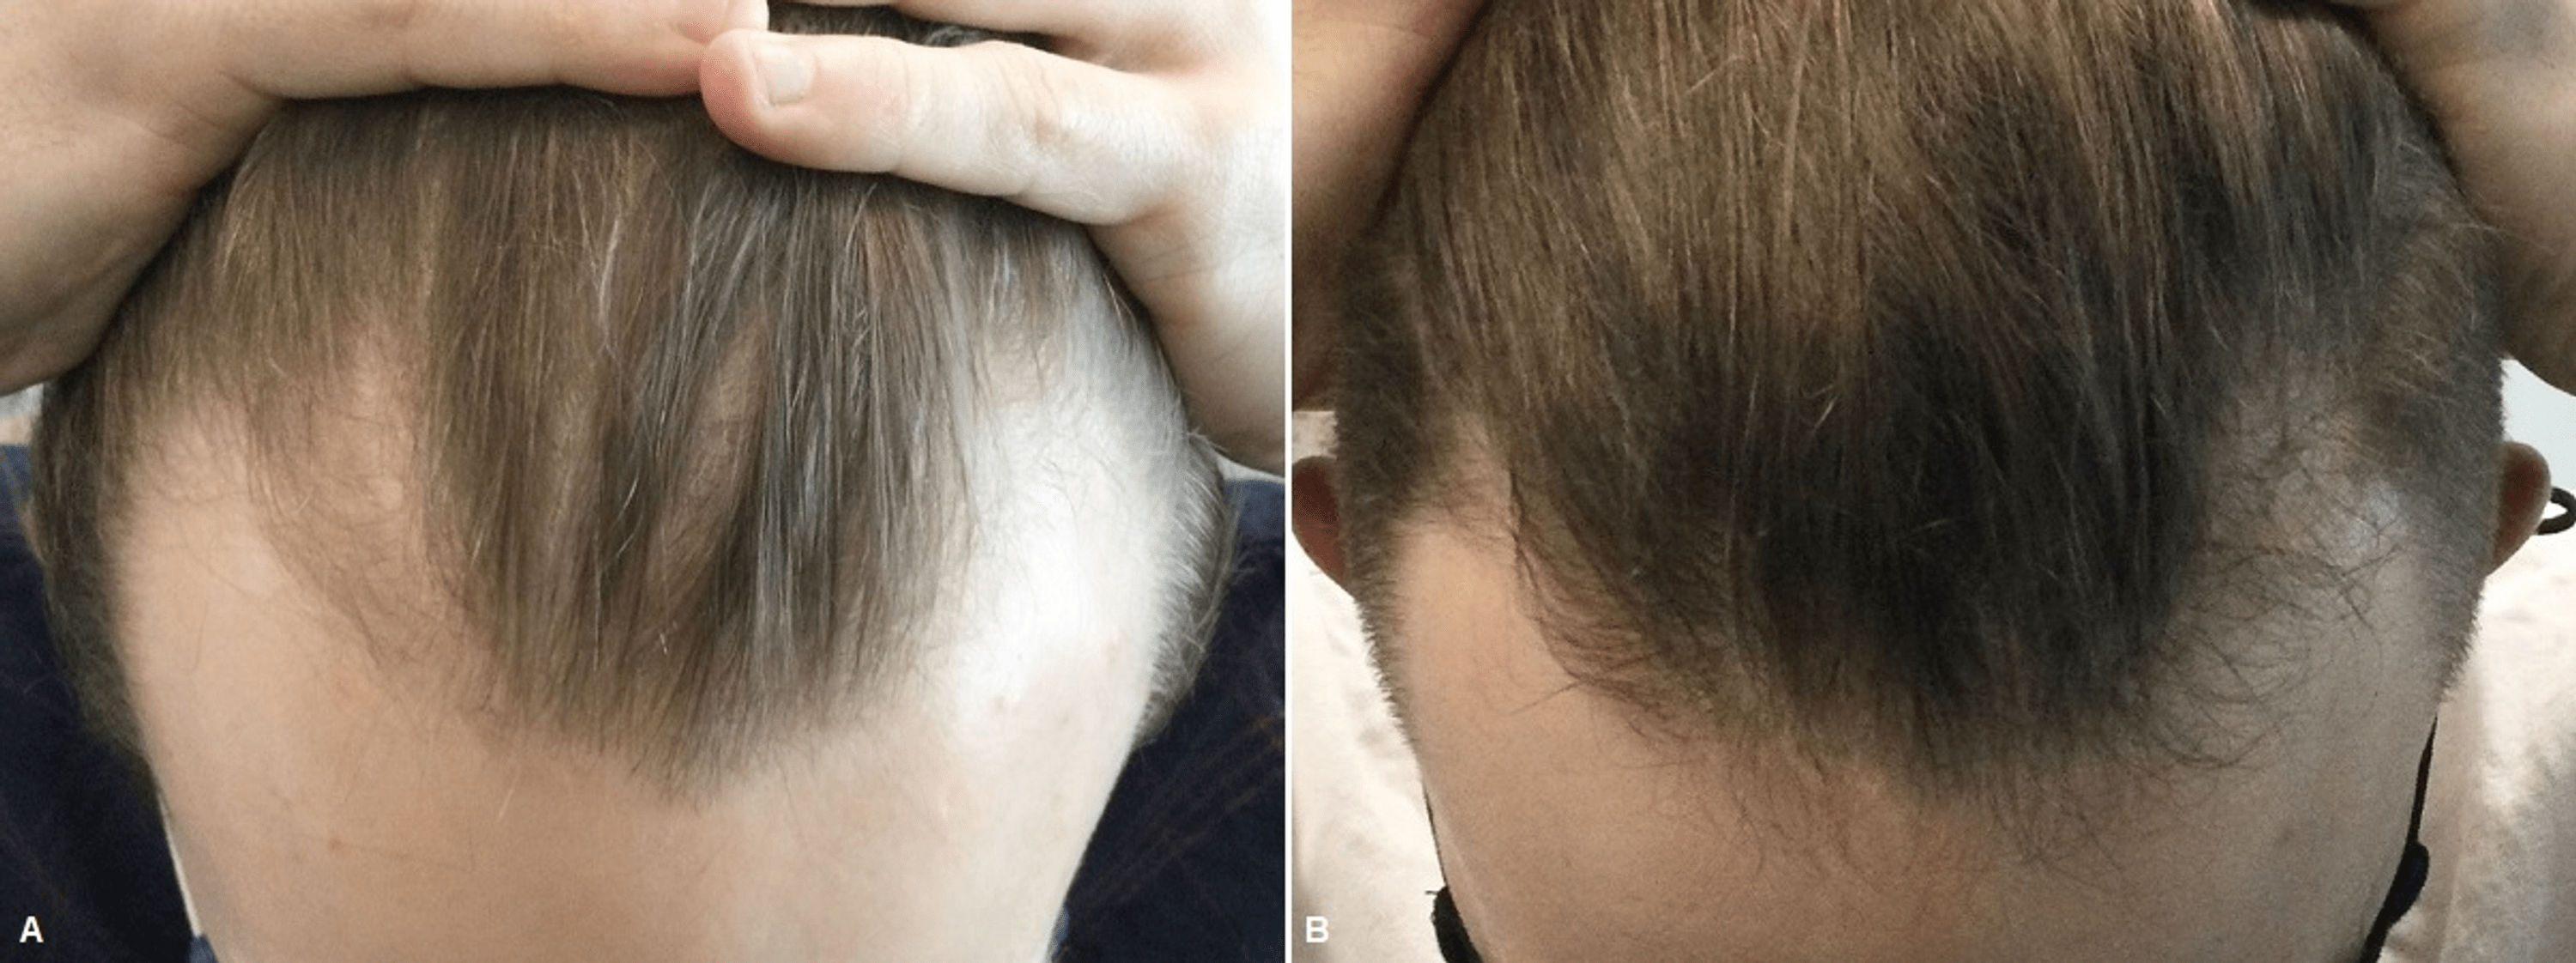 Cureus | Patient Satisfaction and Clinical Effects of Platelet-Rich Plasma  on Pattern Hair Loss in Male and Female Patients | Article